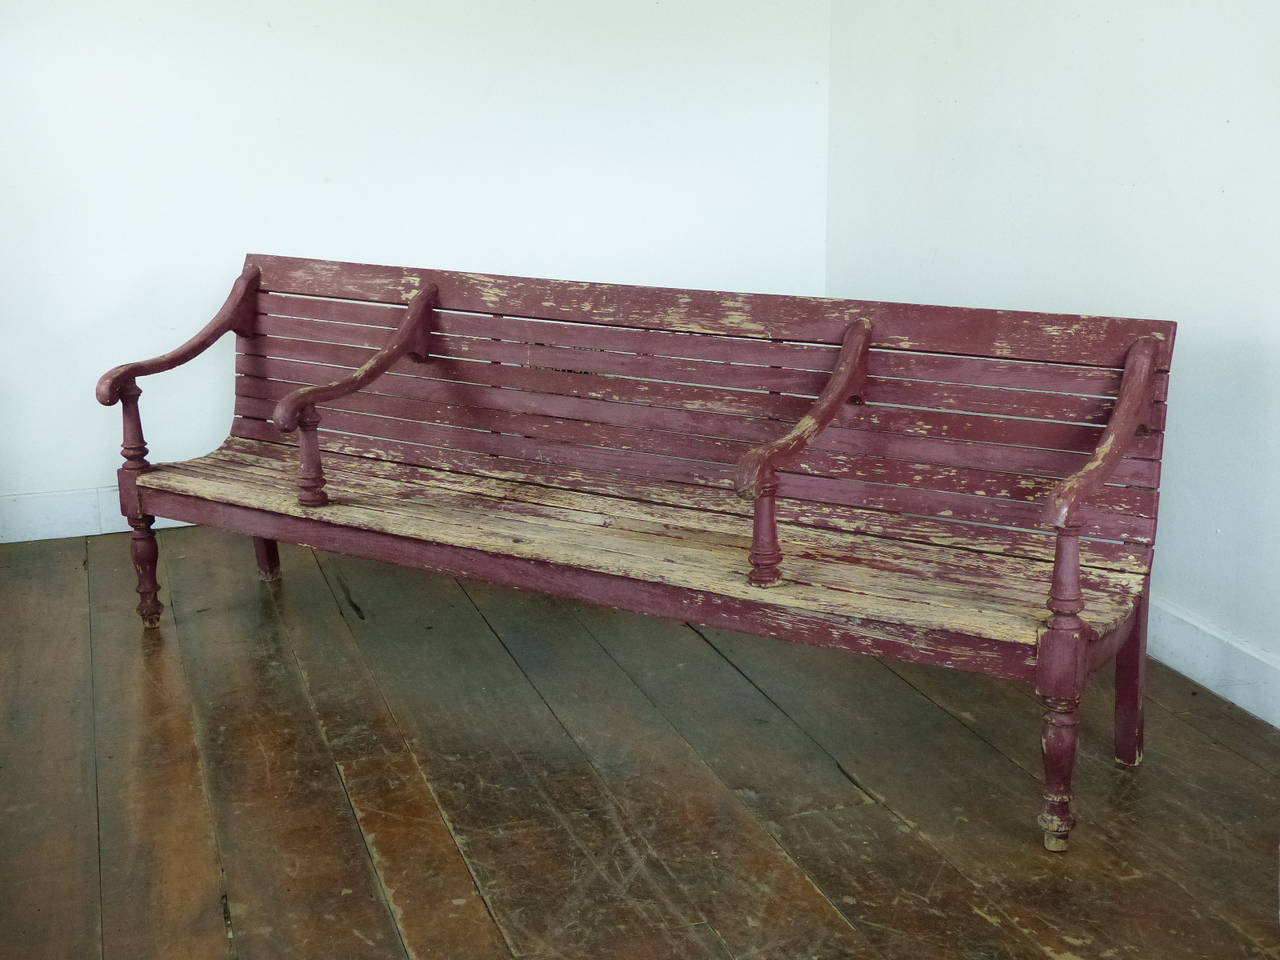 Painted pine train station bench in original red surface paint. As found condition in a dry red patina. Turned legs and deter arm rest spindles add to the look